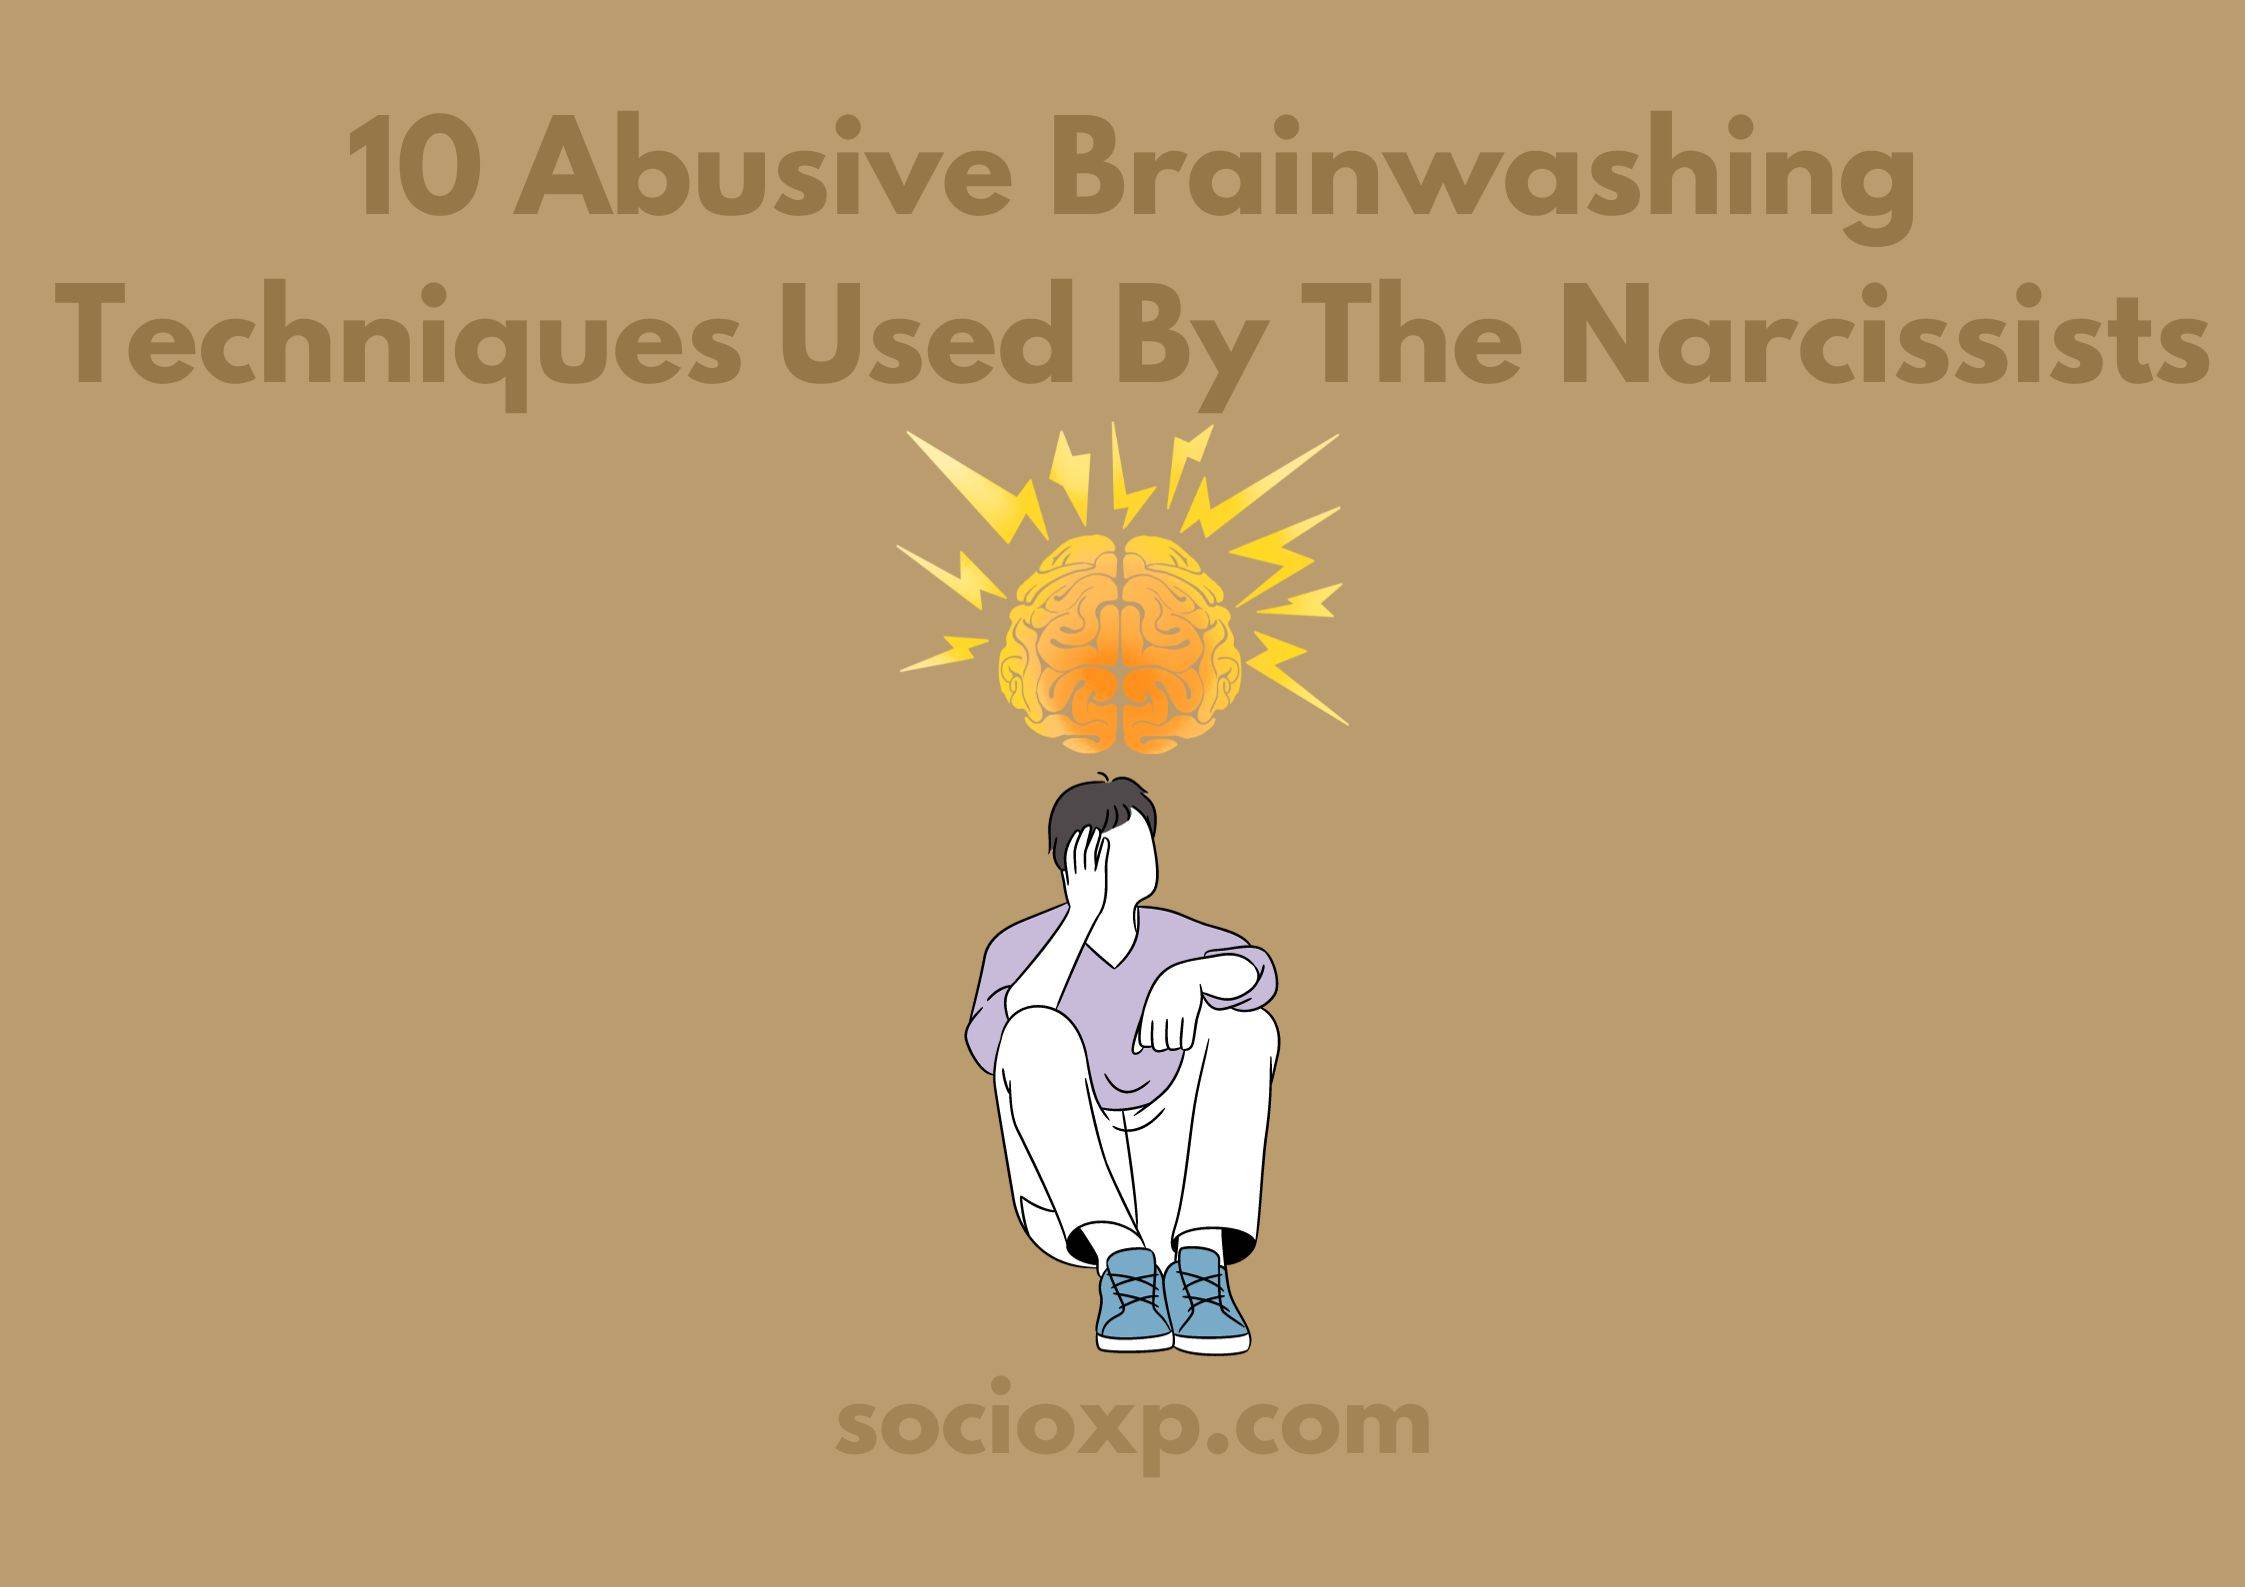 10 Abusive Brainwashing Techniques Used By The Narcissists